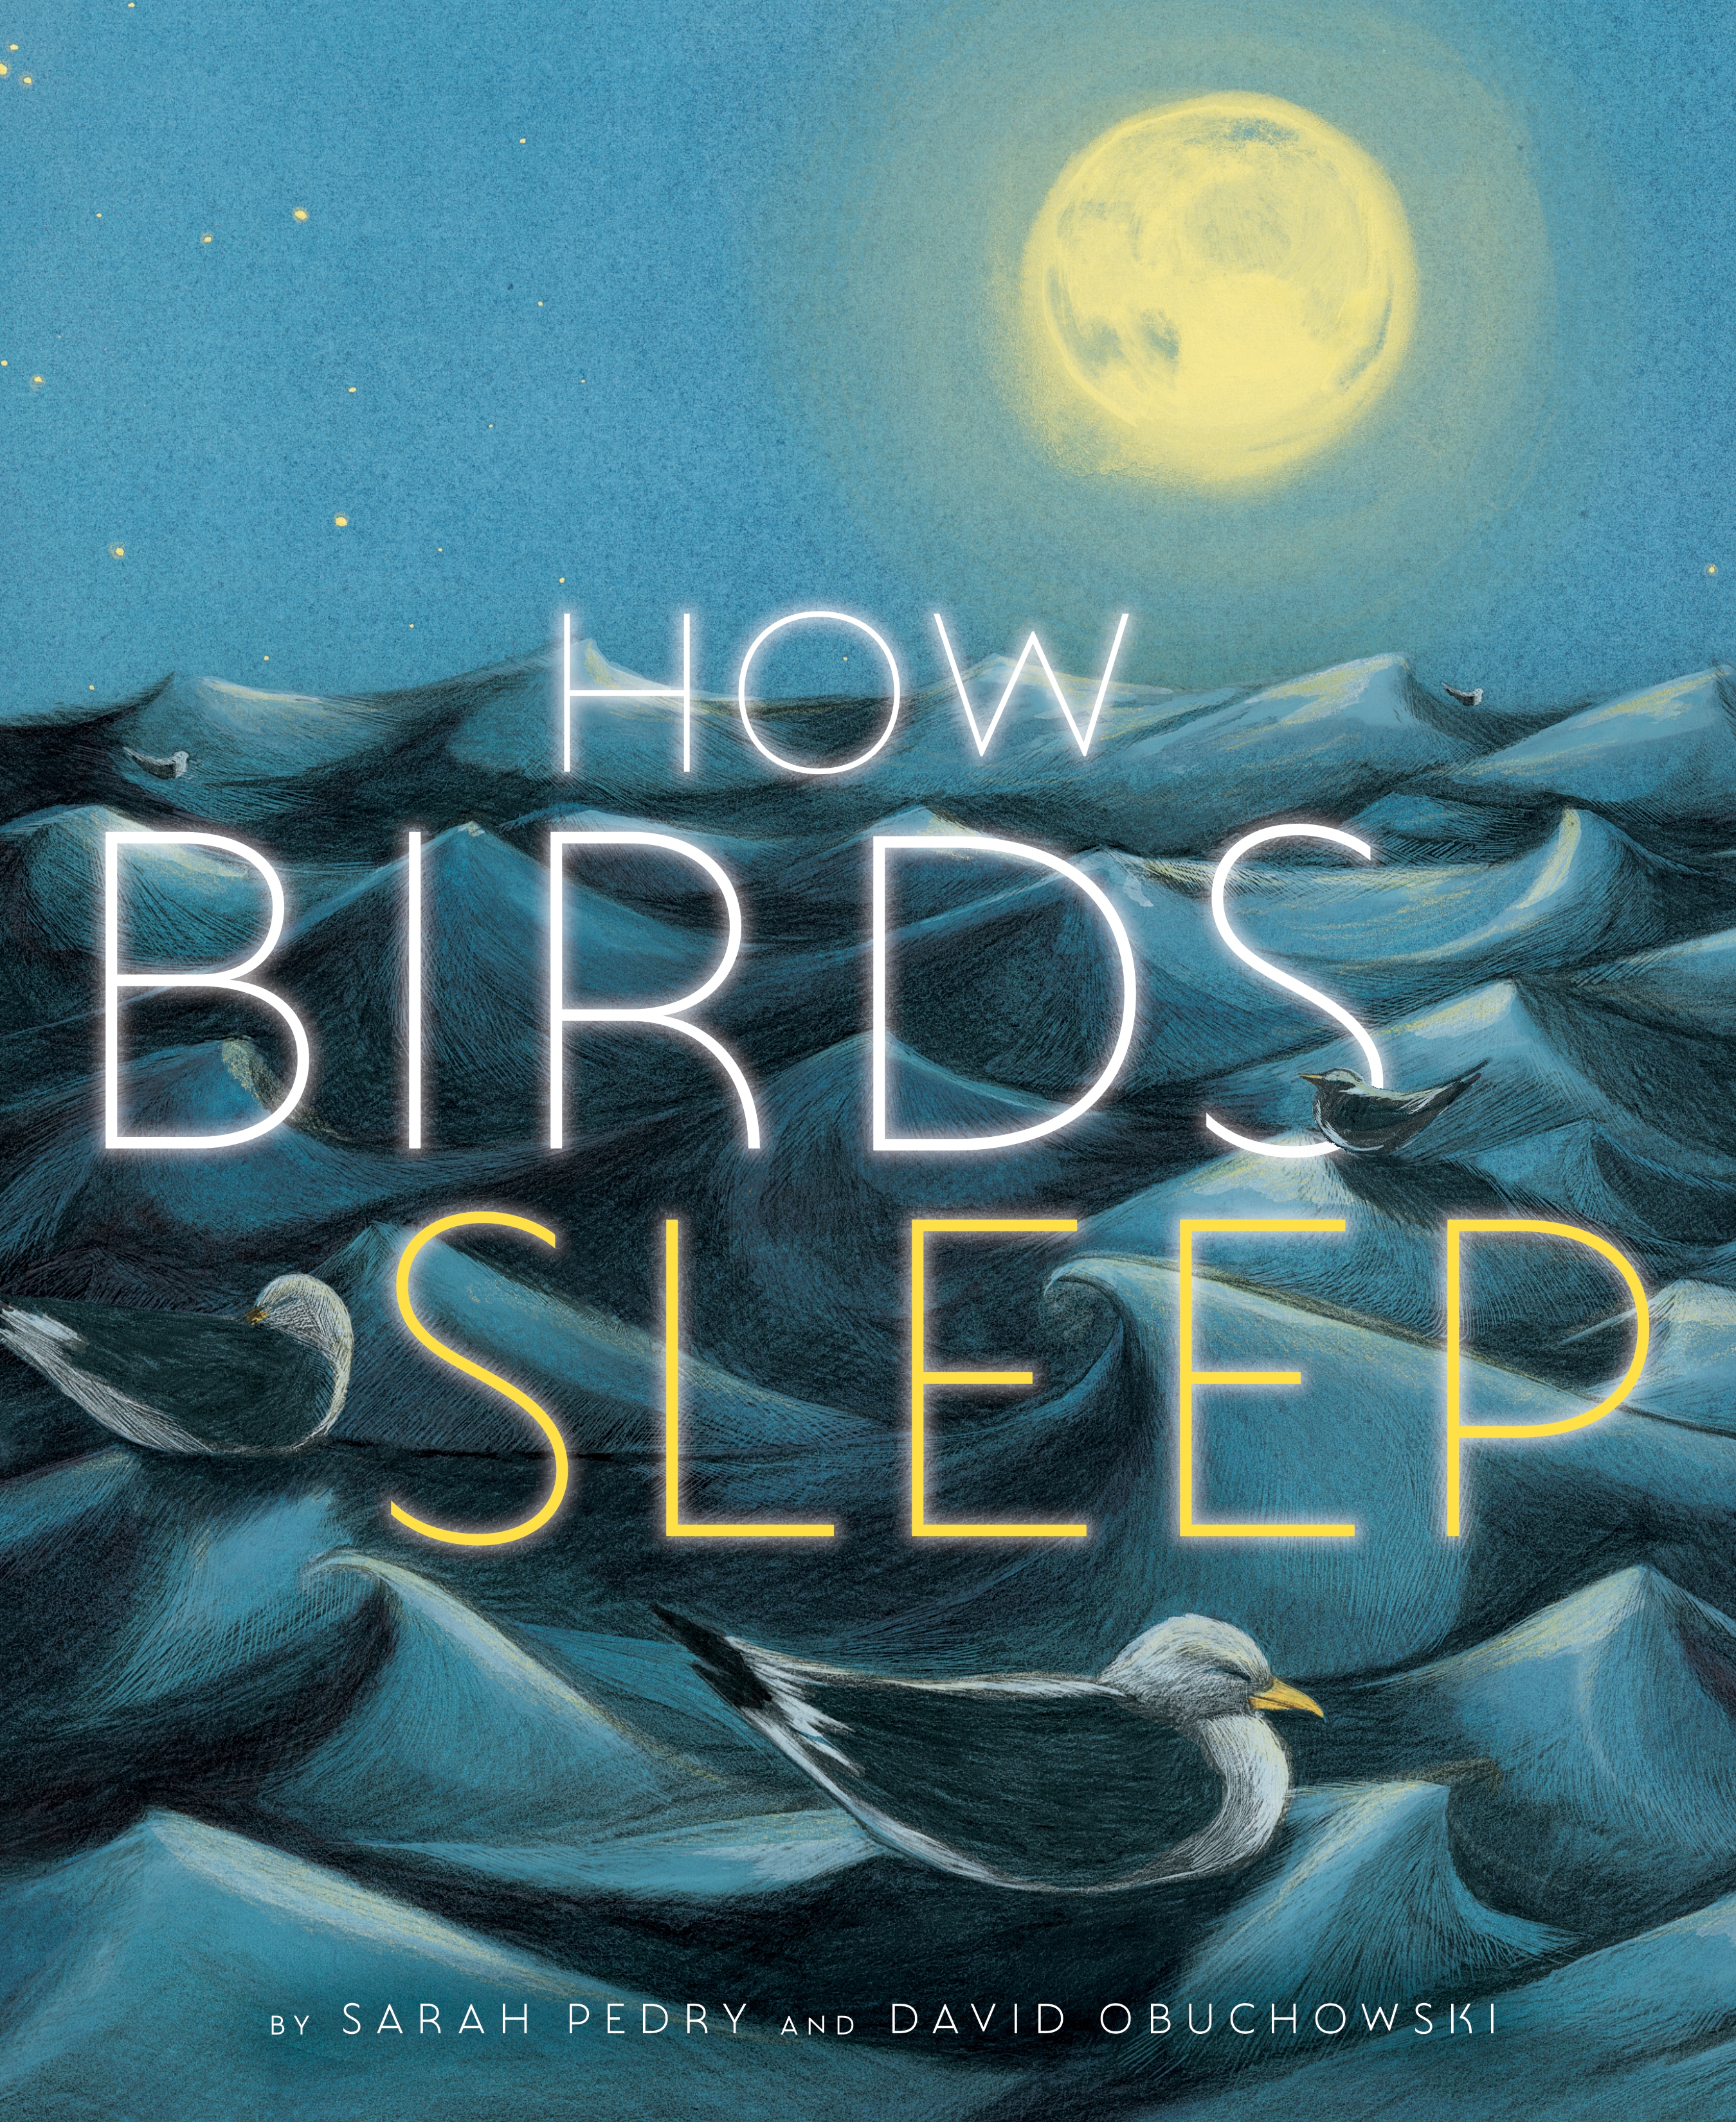 Cover of book with illustration of birds sleeping in the waves with moon in the background.